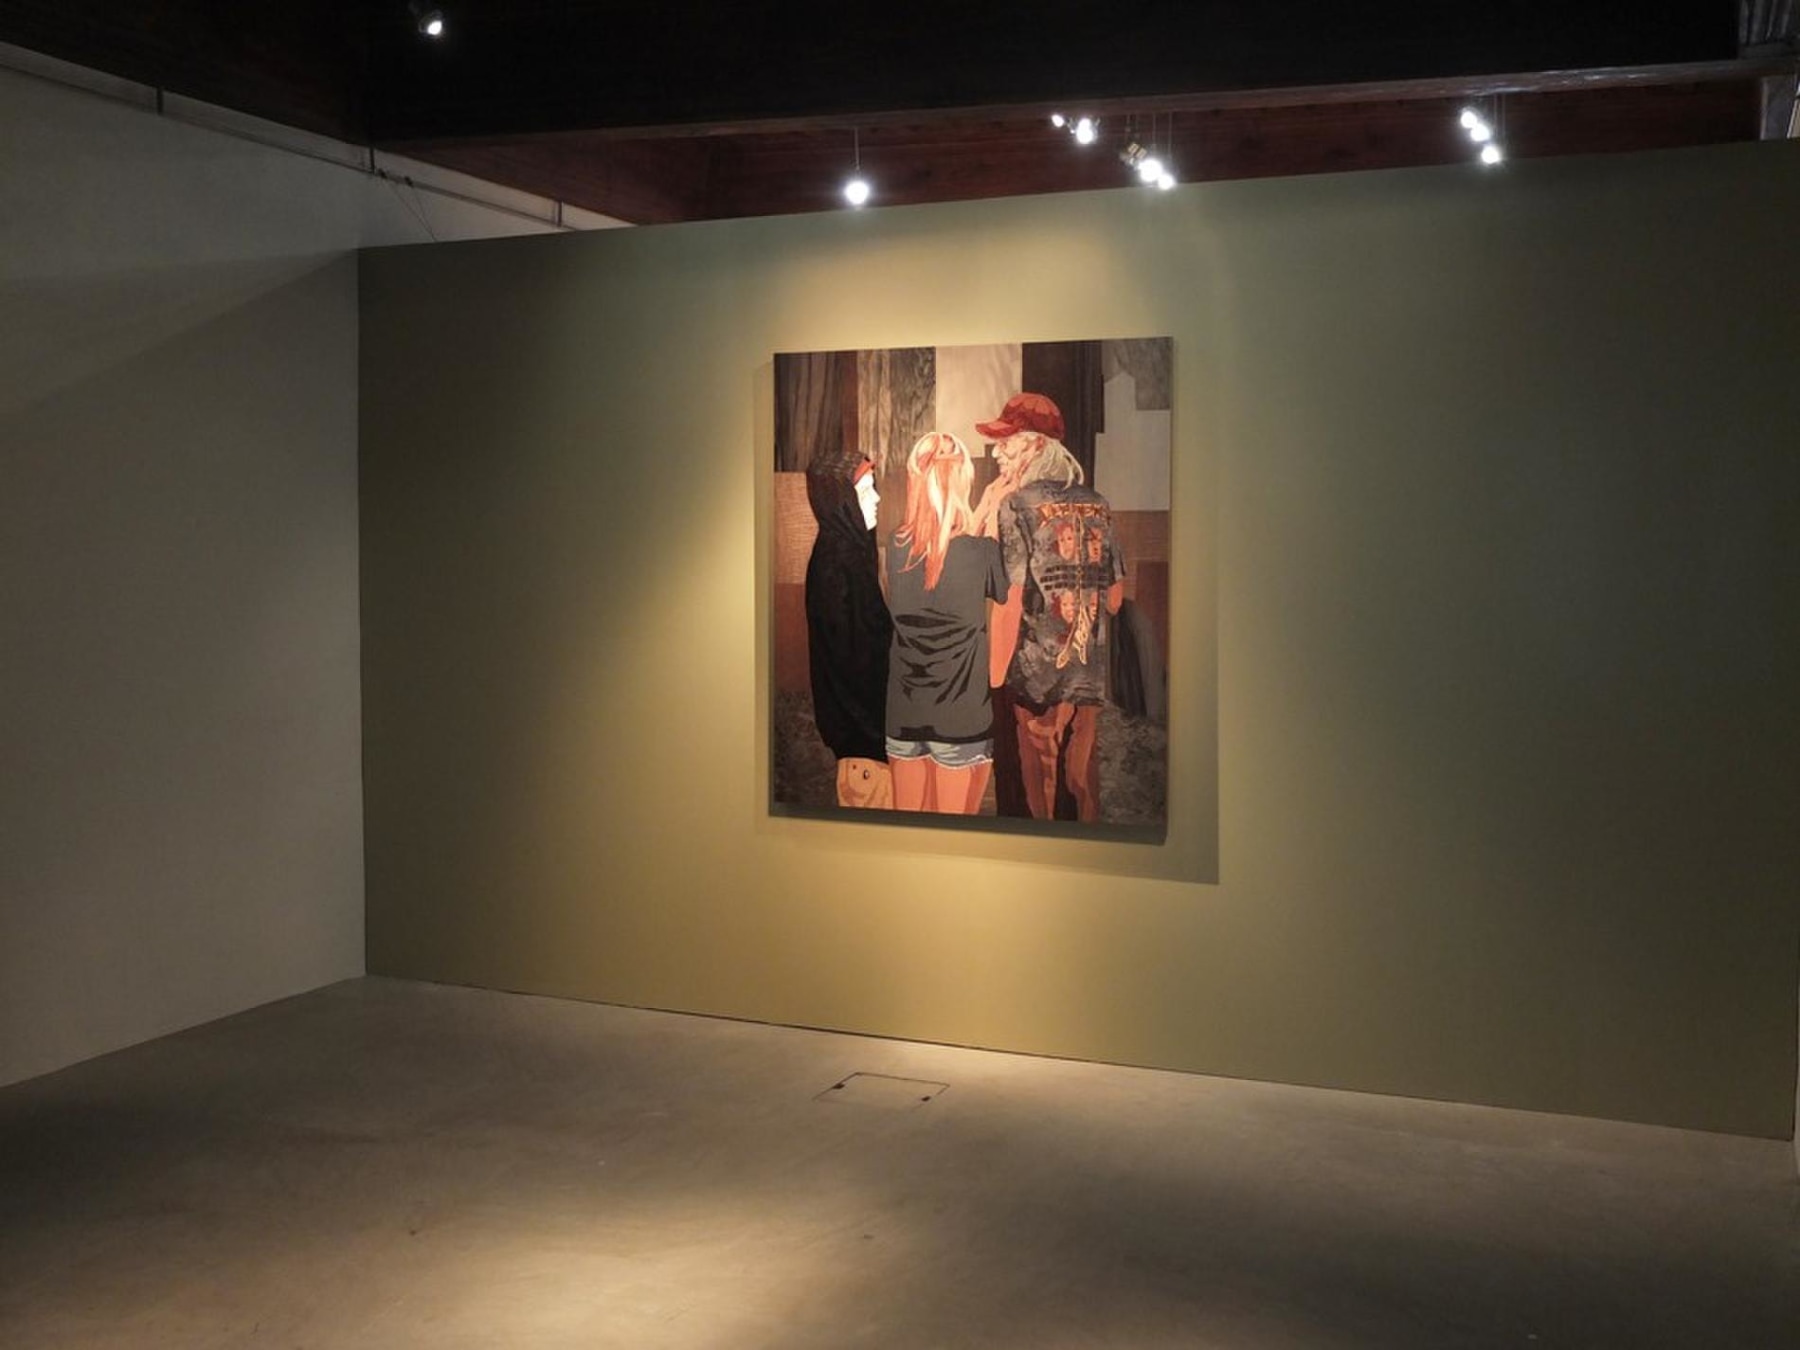 a dimly lit room with a light shining on an artwork depicting a group of three people